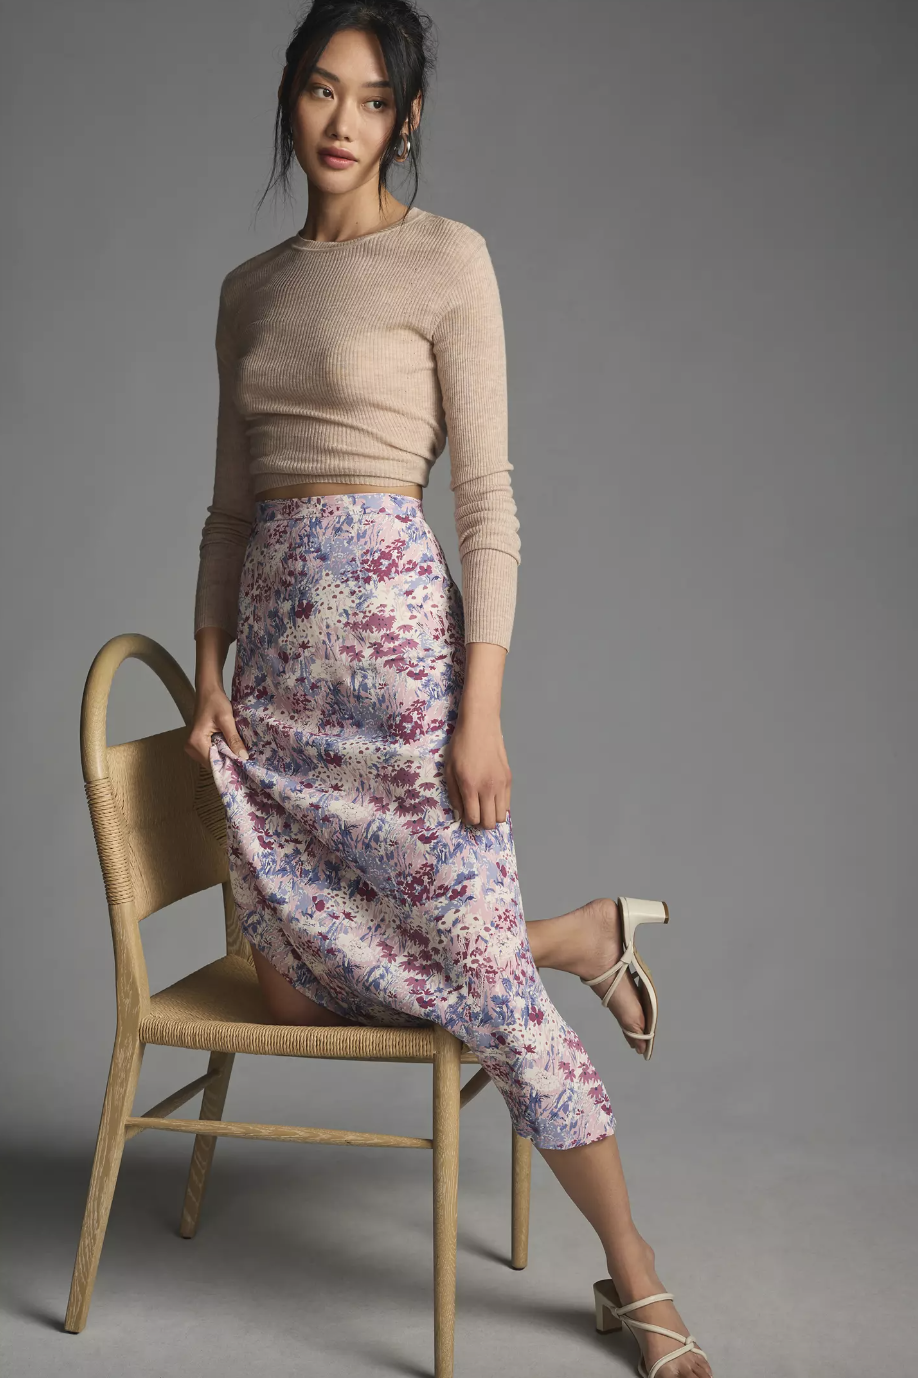 model wearing beige sweater and light purple floral Reformation Bea Skirt (photo via Anthropologie)